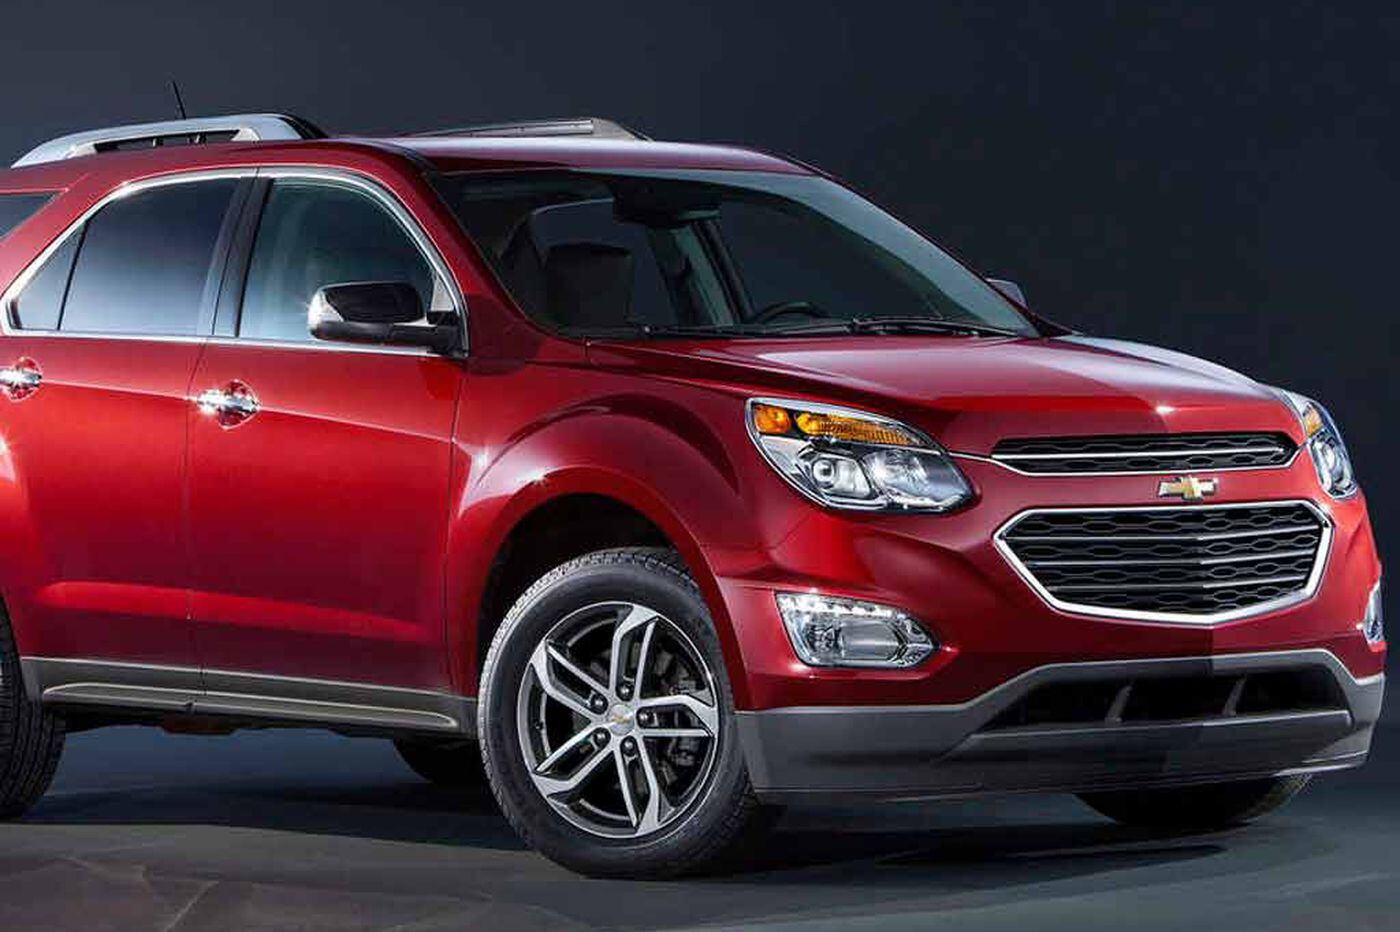 Chevrolet's updated 2016 Equinox is affordable, roomy, stylish